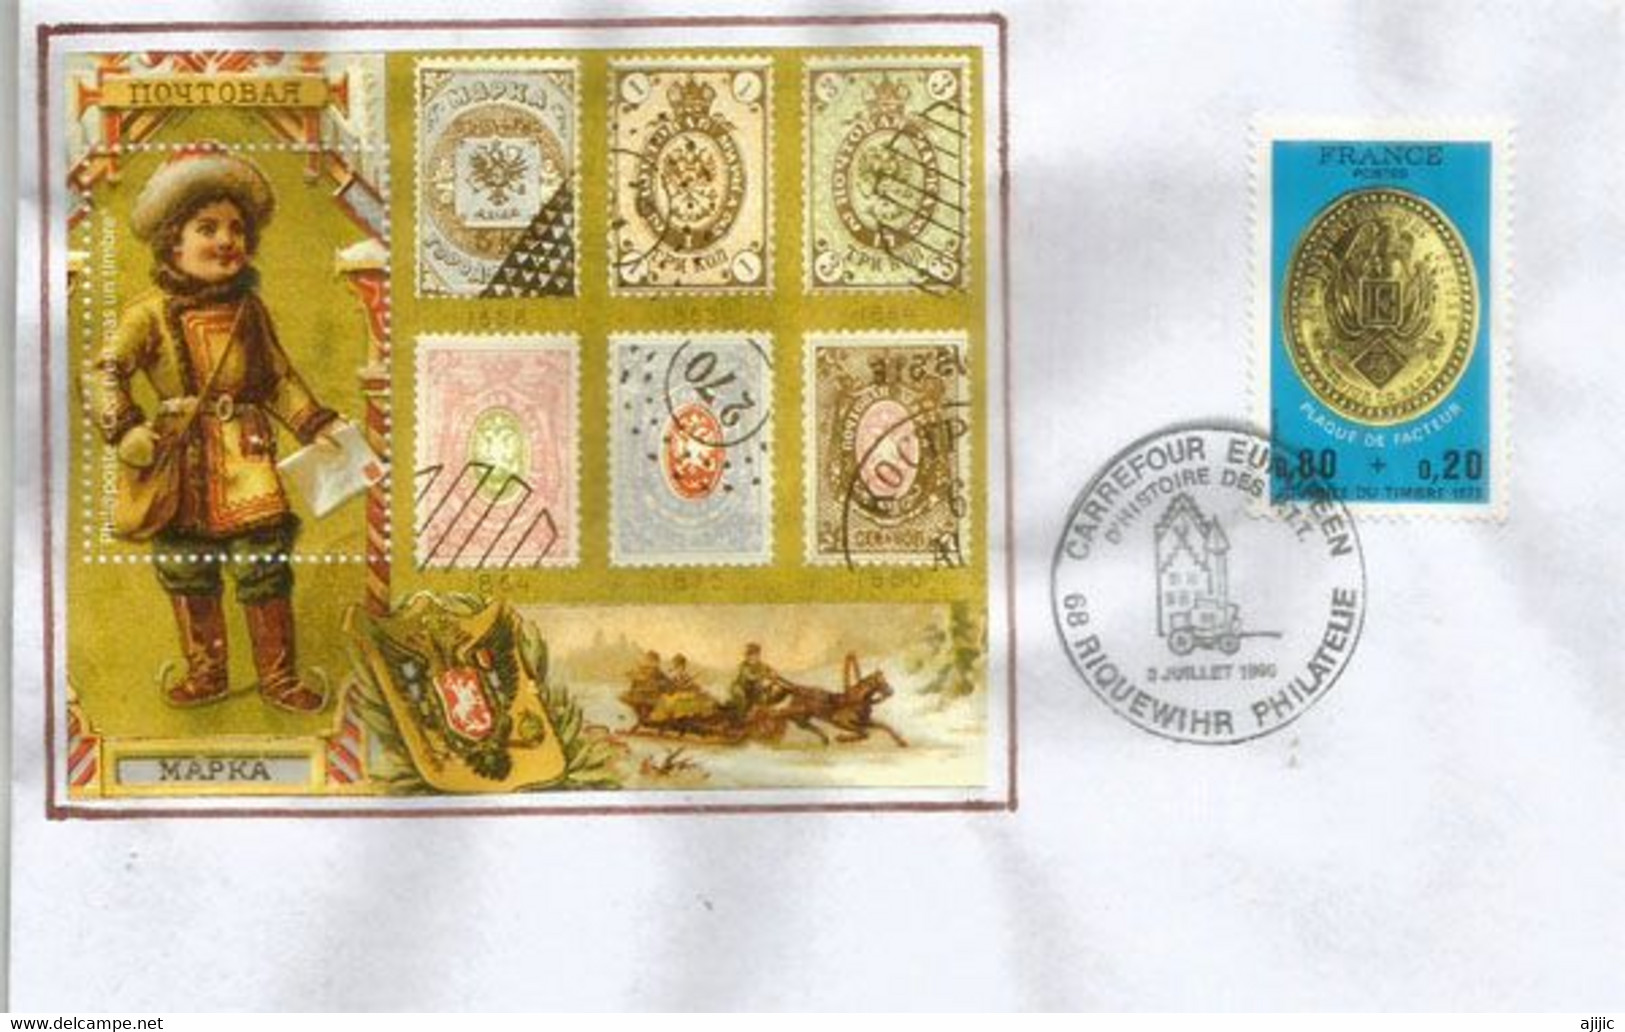 Postal Service History France With The Russian Empire, On Cover "Carrefour Europeen" Riquewihr. France. (Vignette) - Errors & Oddities